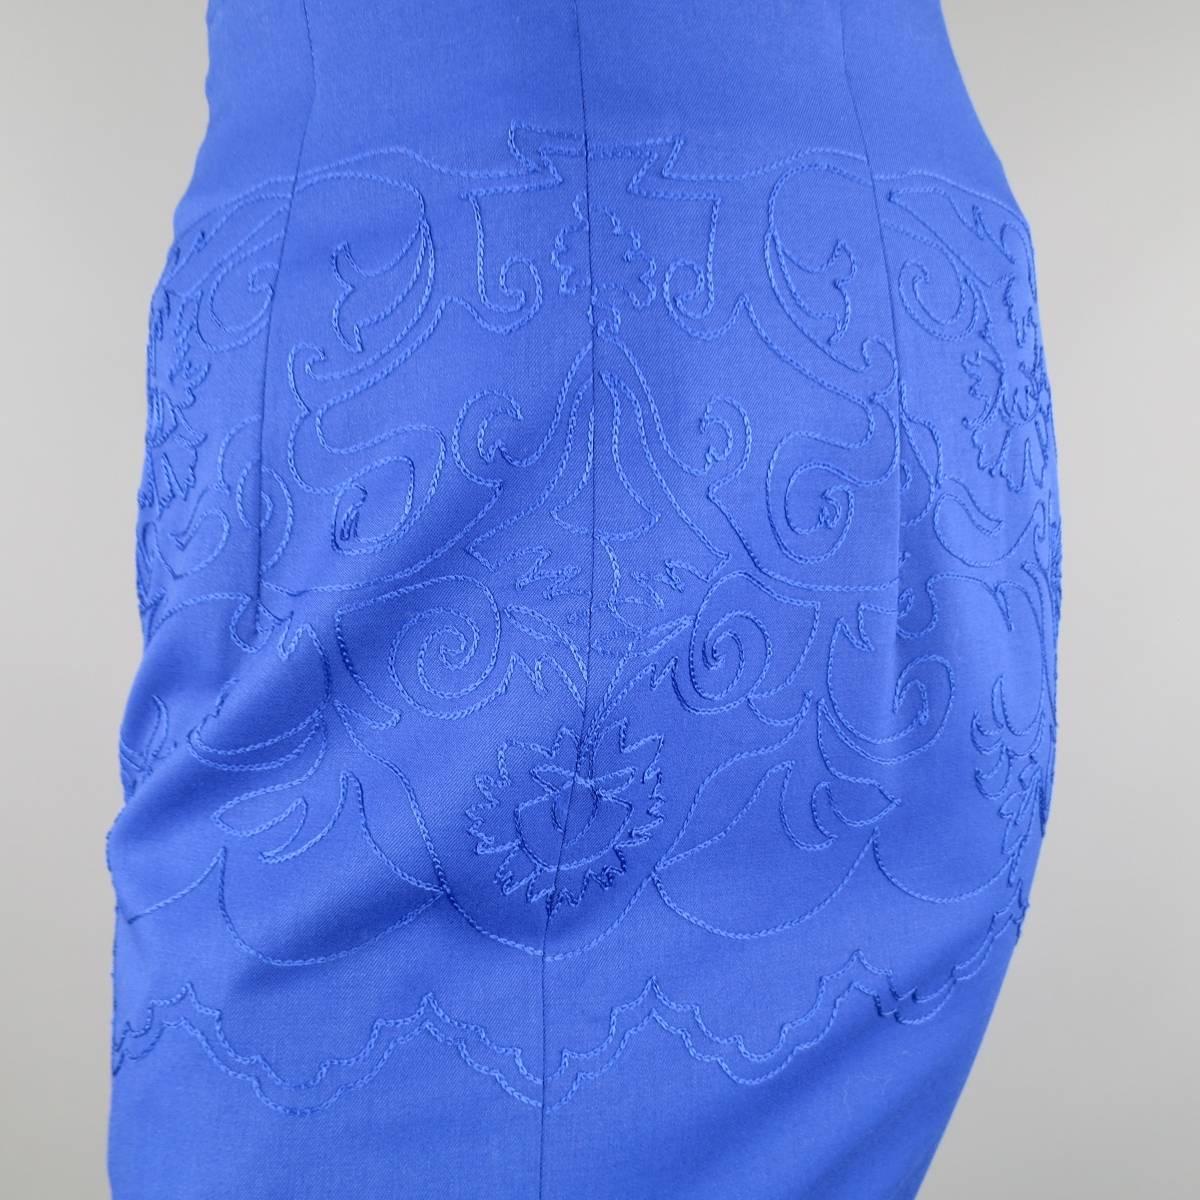 Vintage 1980's GIANNI VERSACE pencil skirt in a brilliant royal blue wool featuring an embroidered pattern through the mid section. Made in Italy.
 
Excellent Pre-Owned Condition.
Marked: 